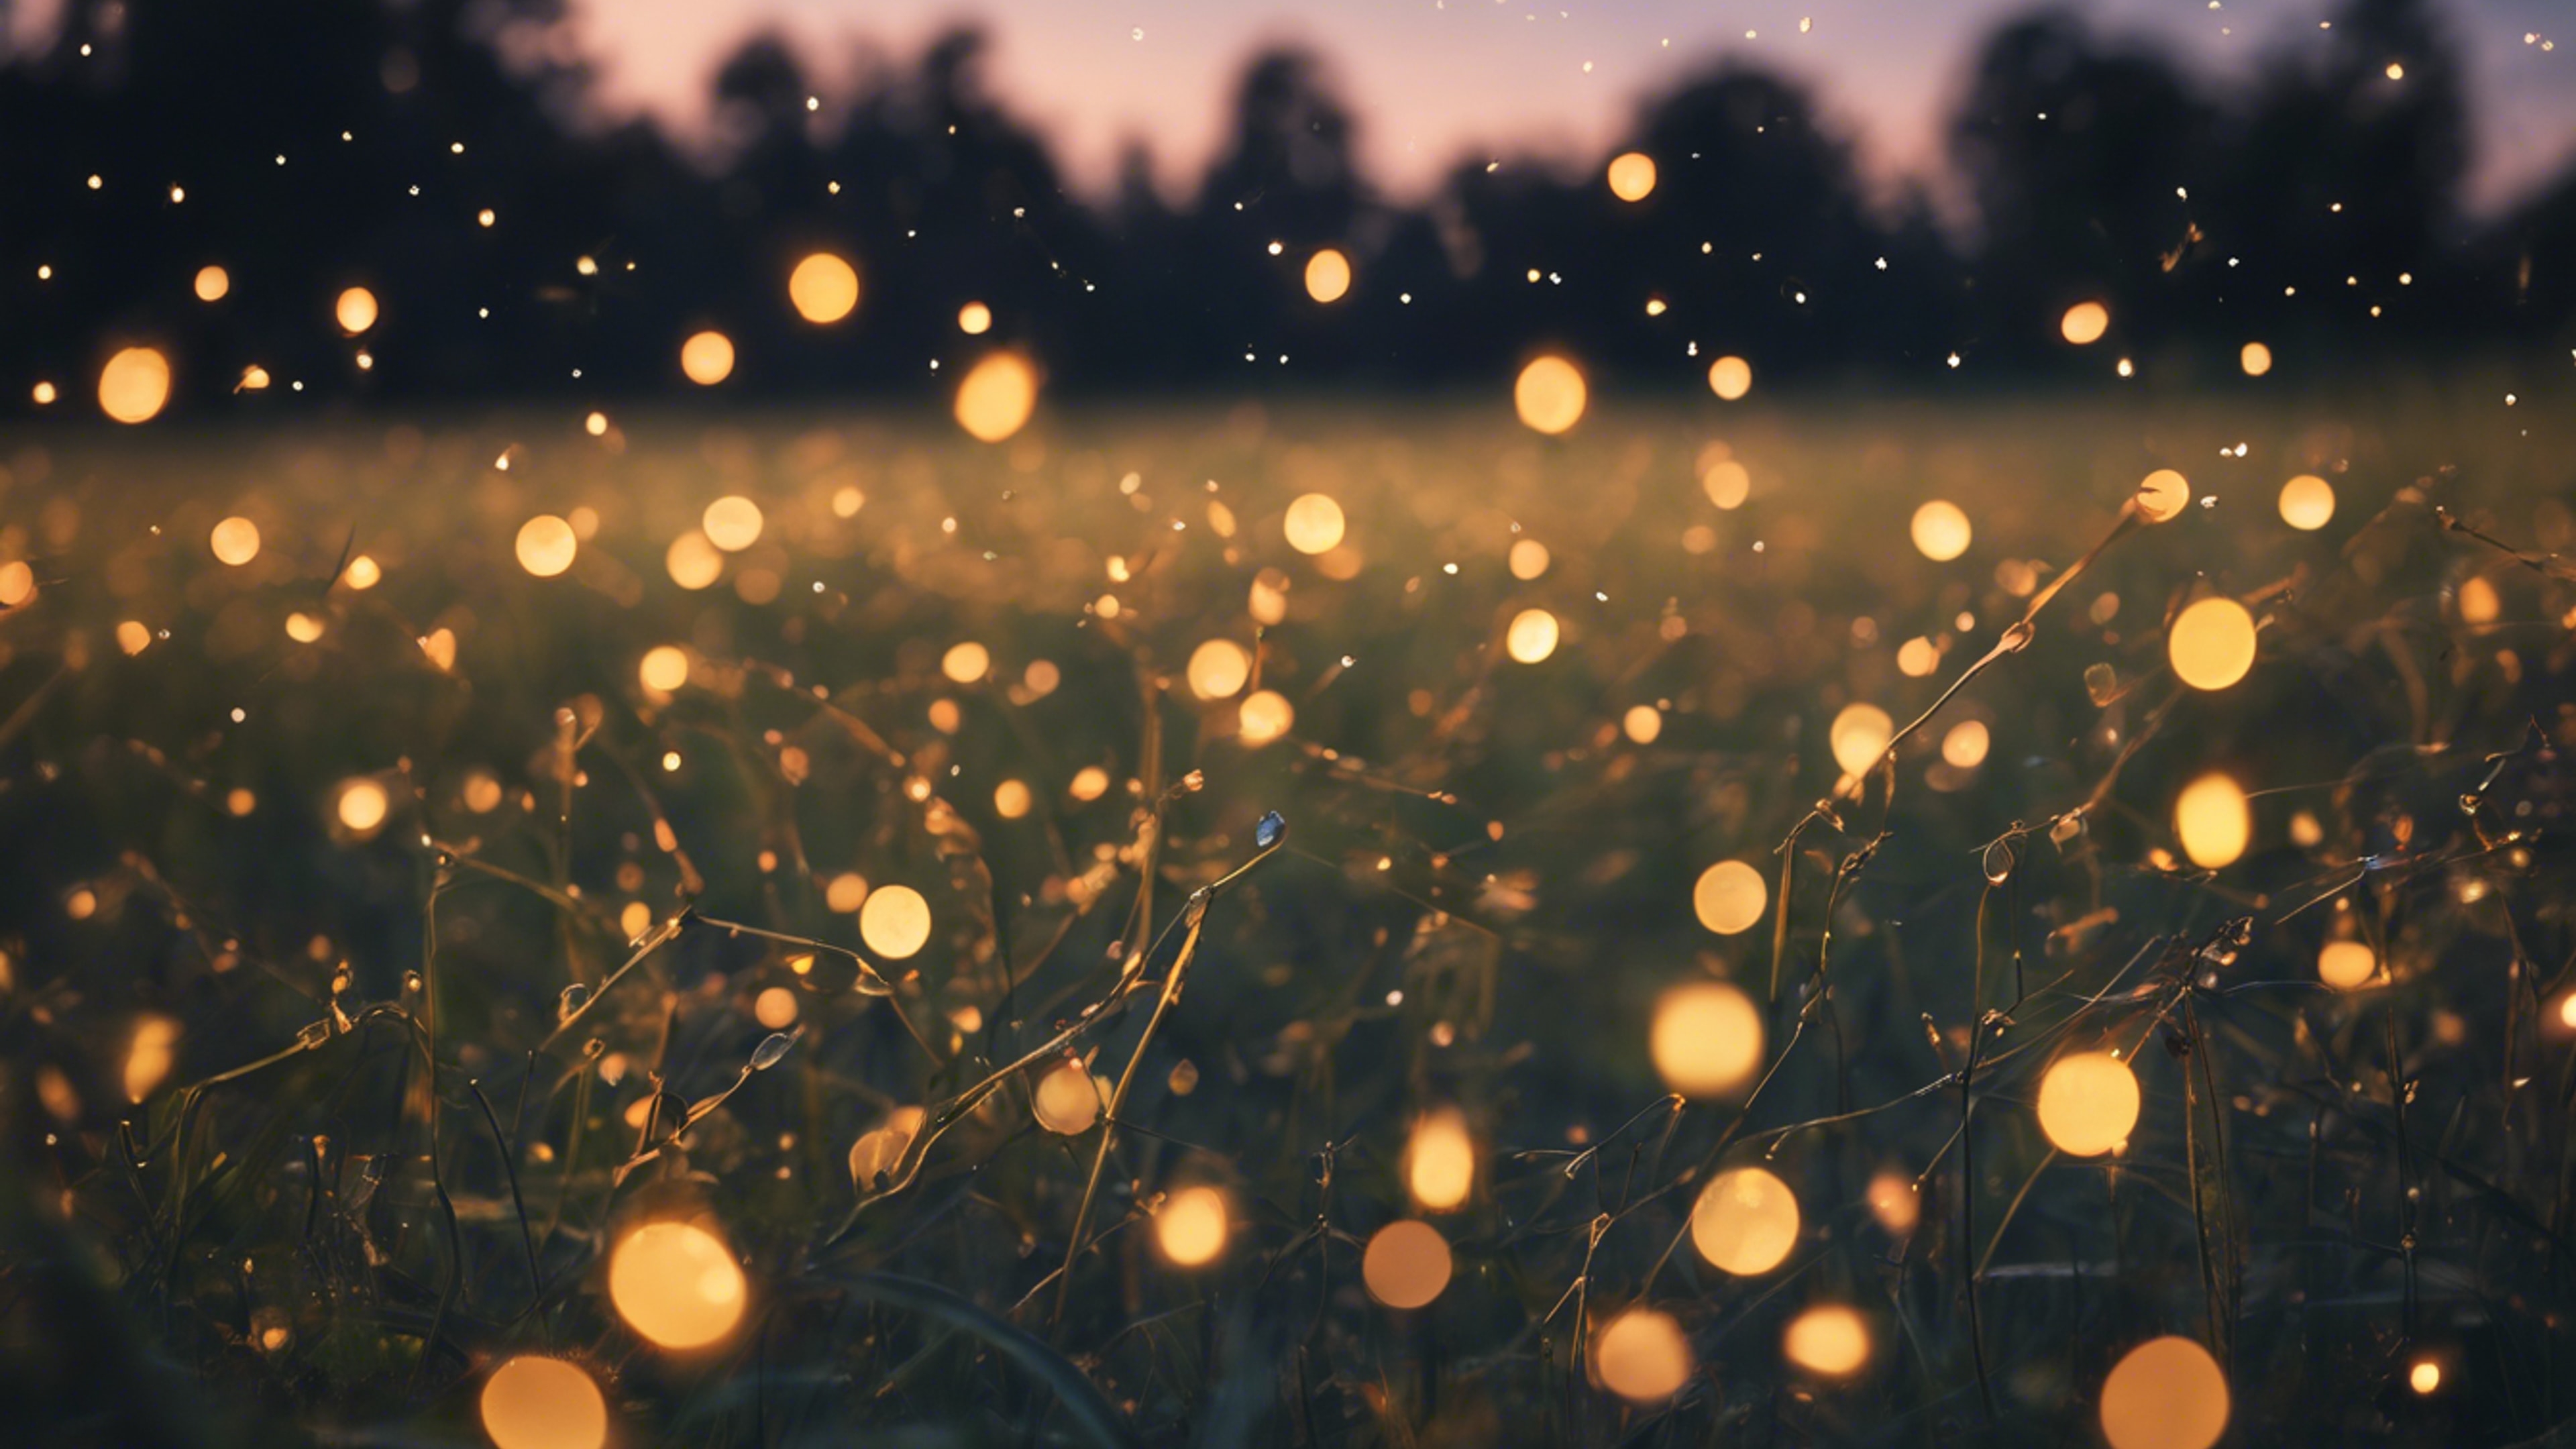 A star-covered sky over a field of fireflies in the early evening.壁紙[ff9882504a5645b5bdf1]